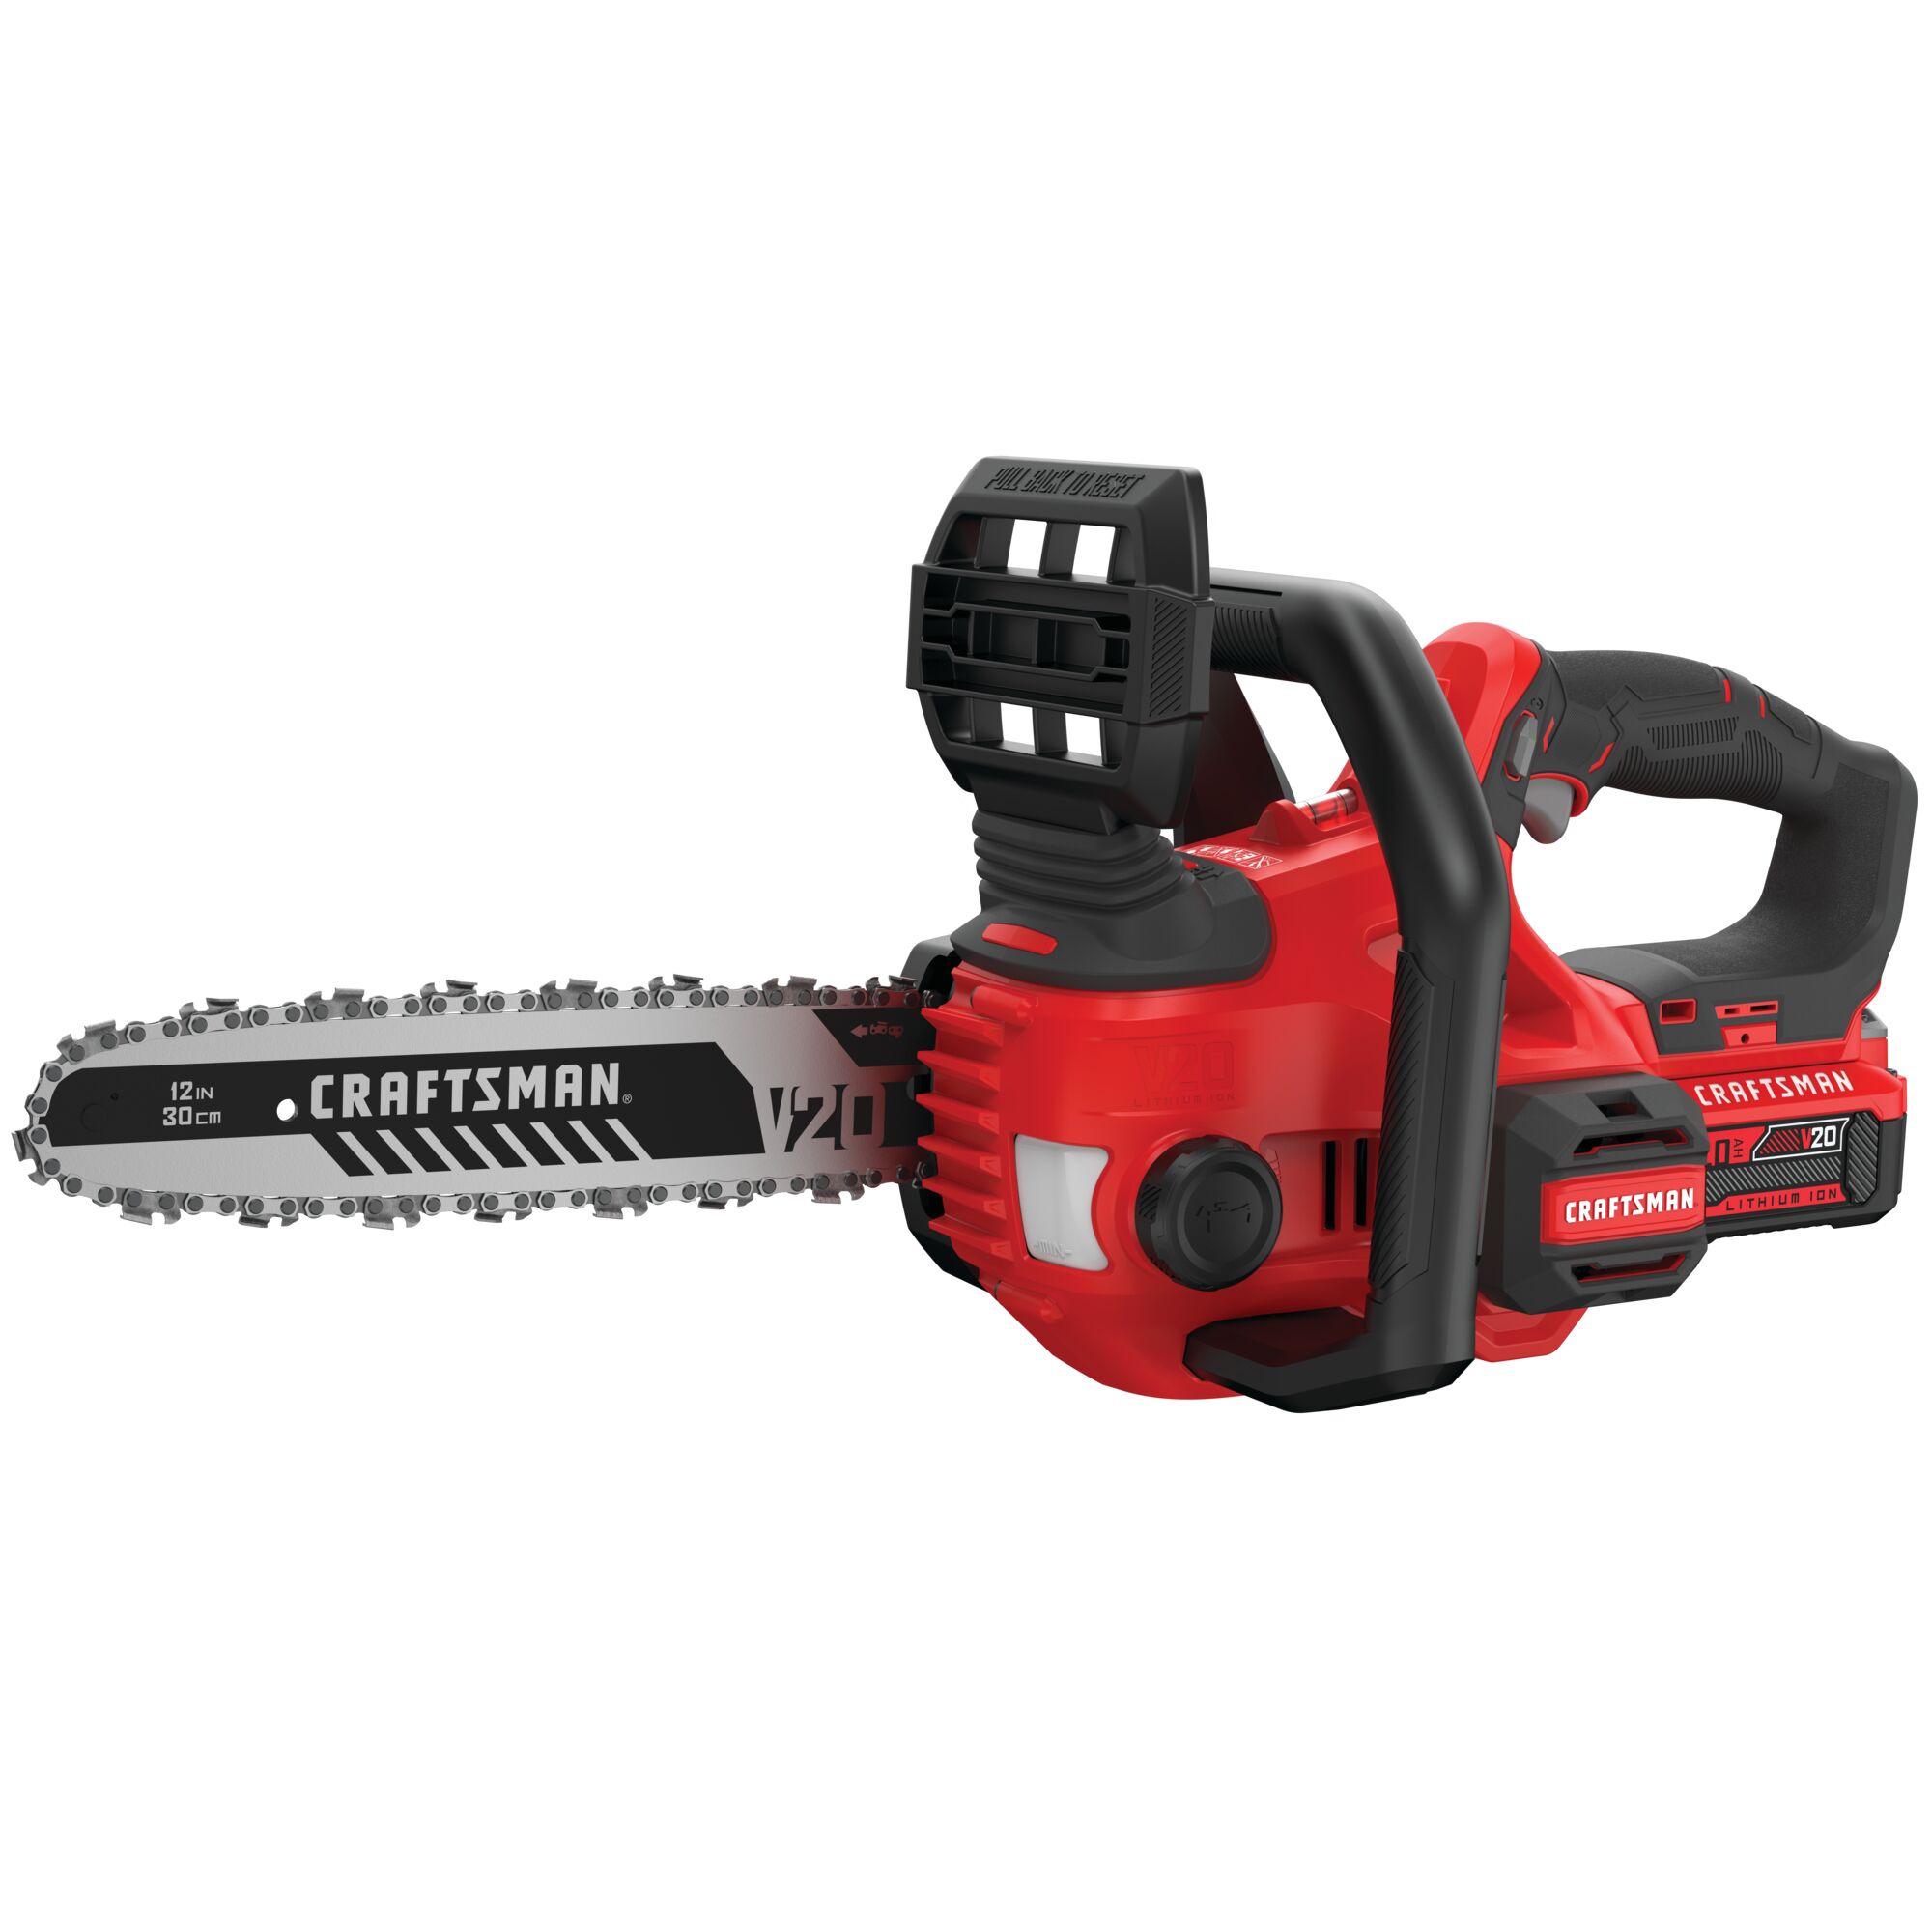 12 inch cordless compact chainsaw kit 4 amp hour.